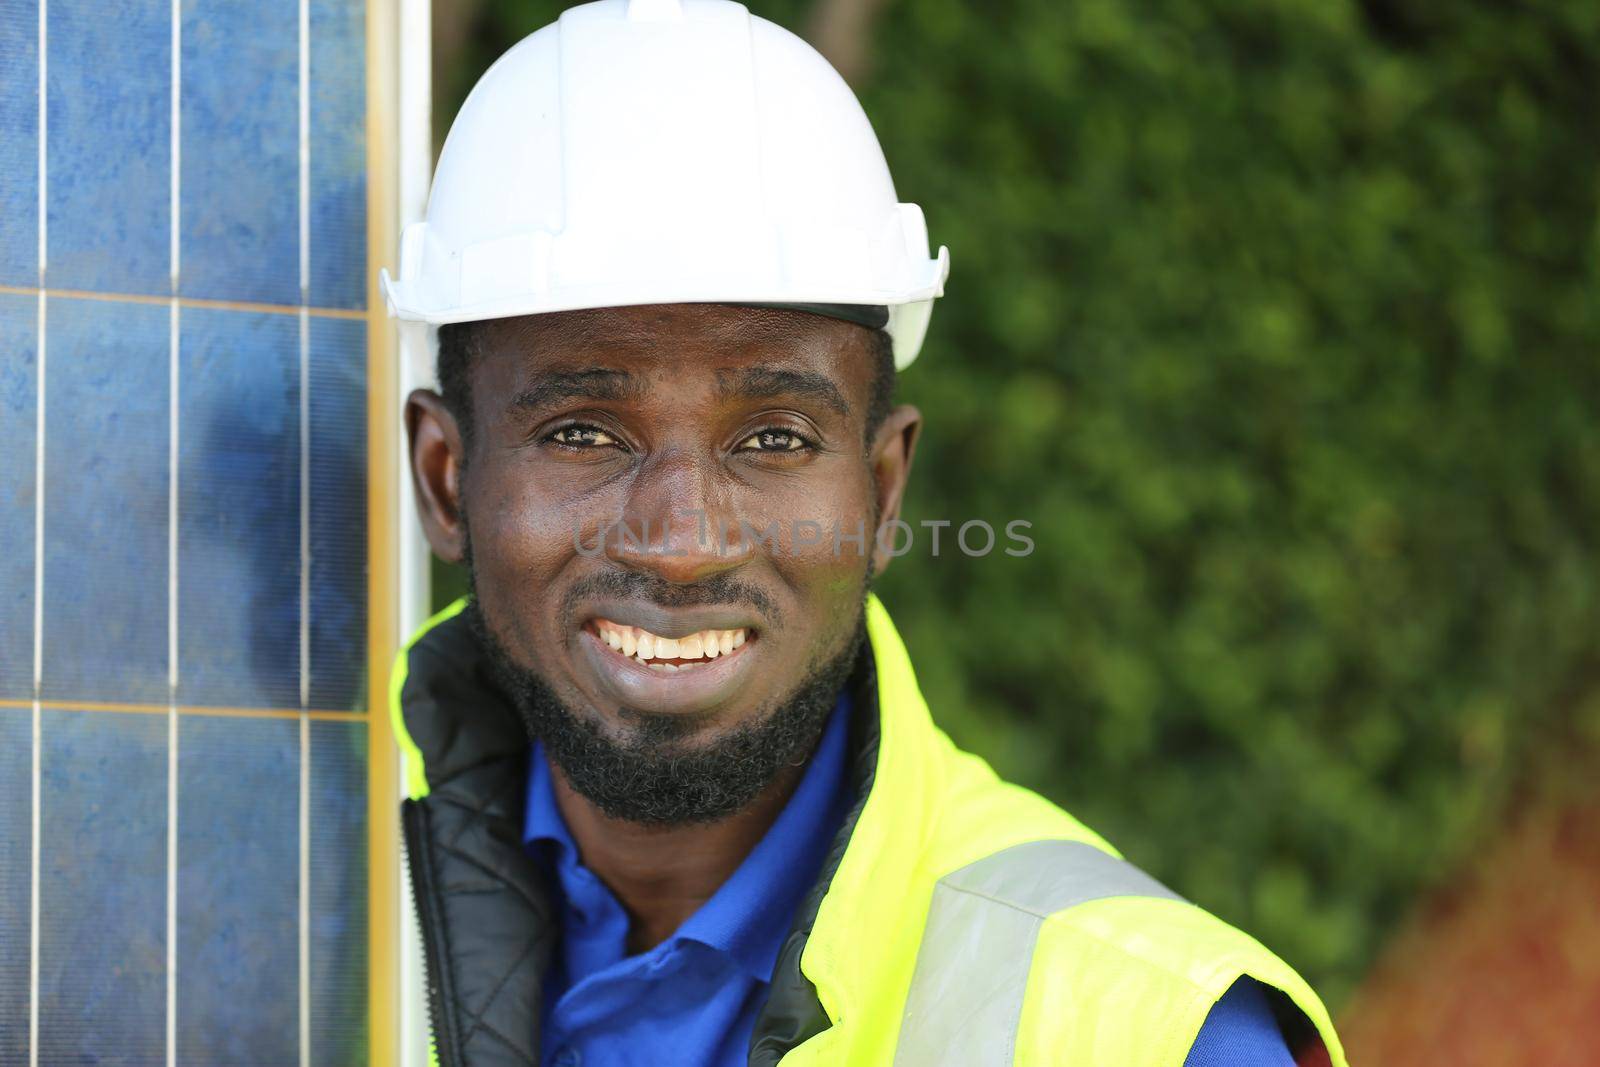 maintenance engineer, Solar energy systems engineer perform analysis solar panels, Portrait of engineer man or worker, people, with solar panels or solar cells on the roof in farm. Power plant with green field, renewable energy source in American. Eco technology for electric power.